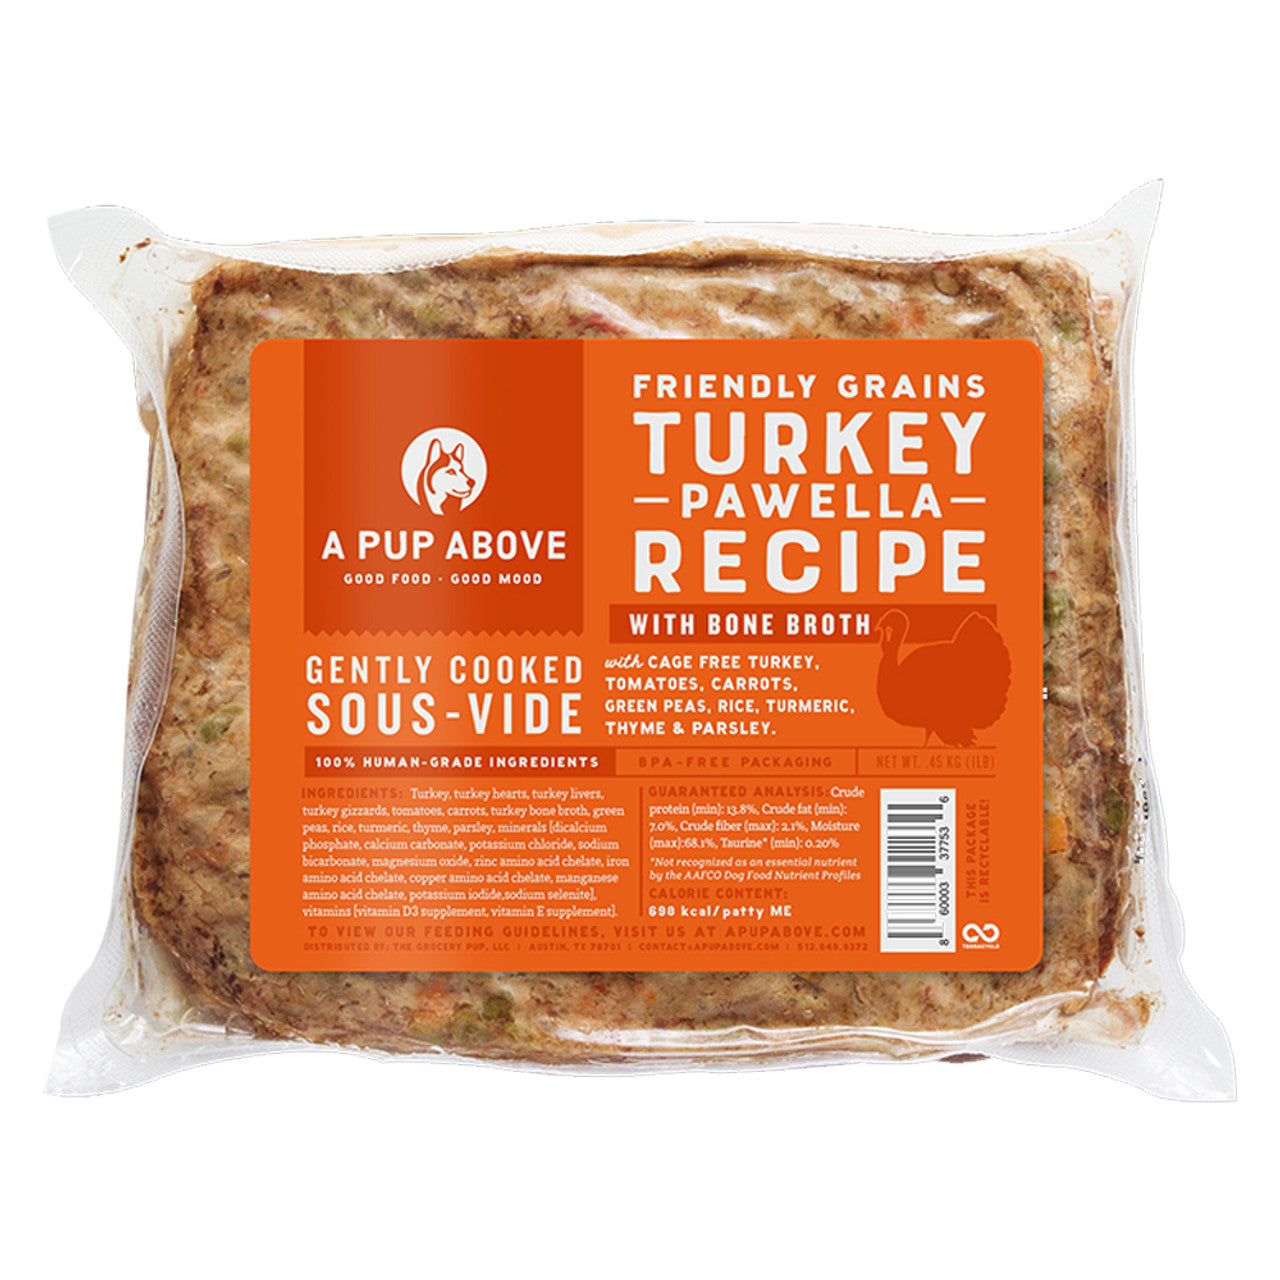 A Pup Above Gently Cooked Friendly Grains Turkey Pawella Recipe w/ Bone Broth Frozen Dog Food 1lb